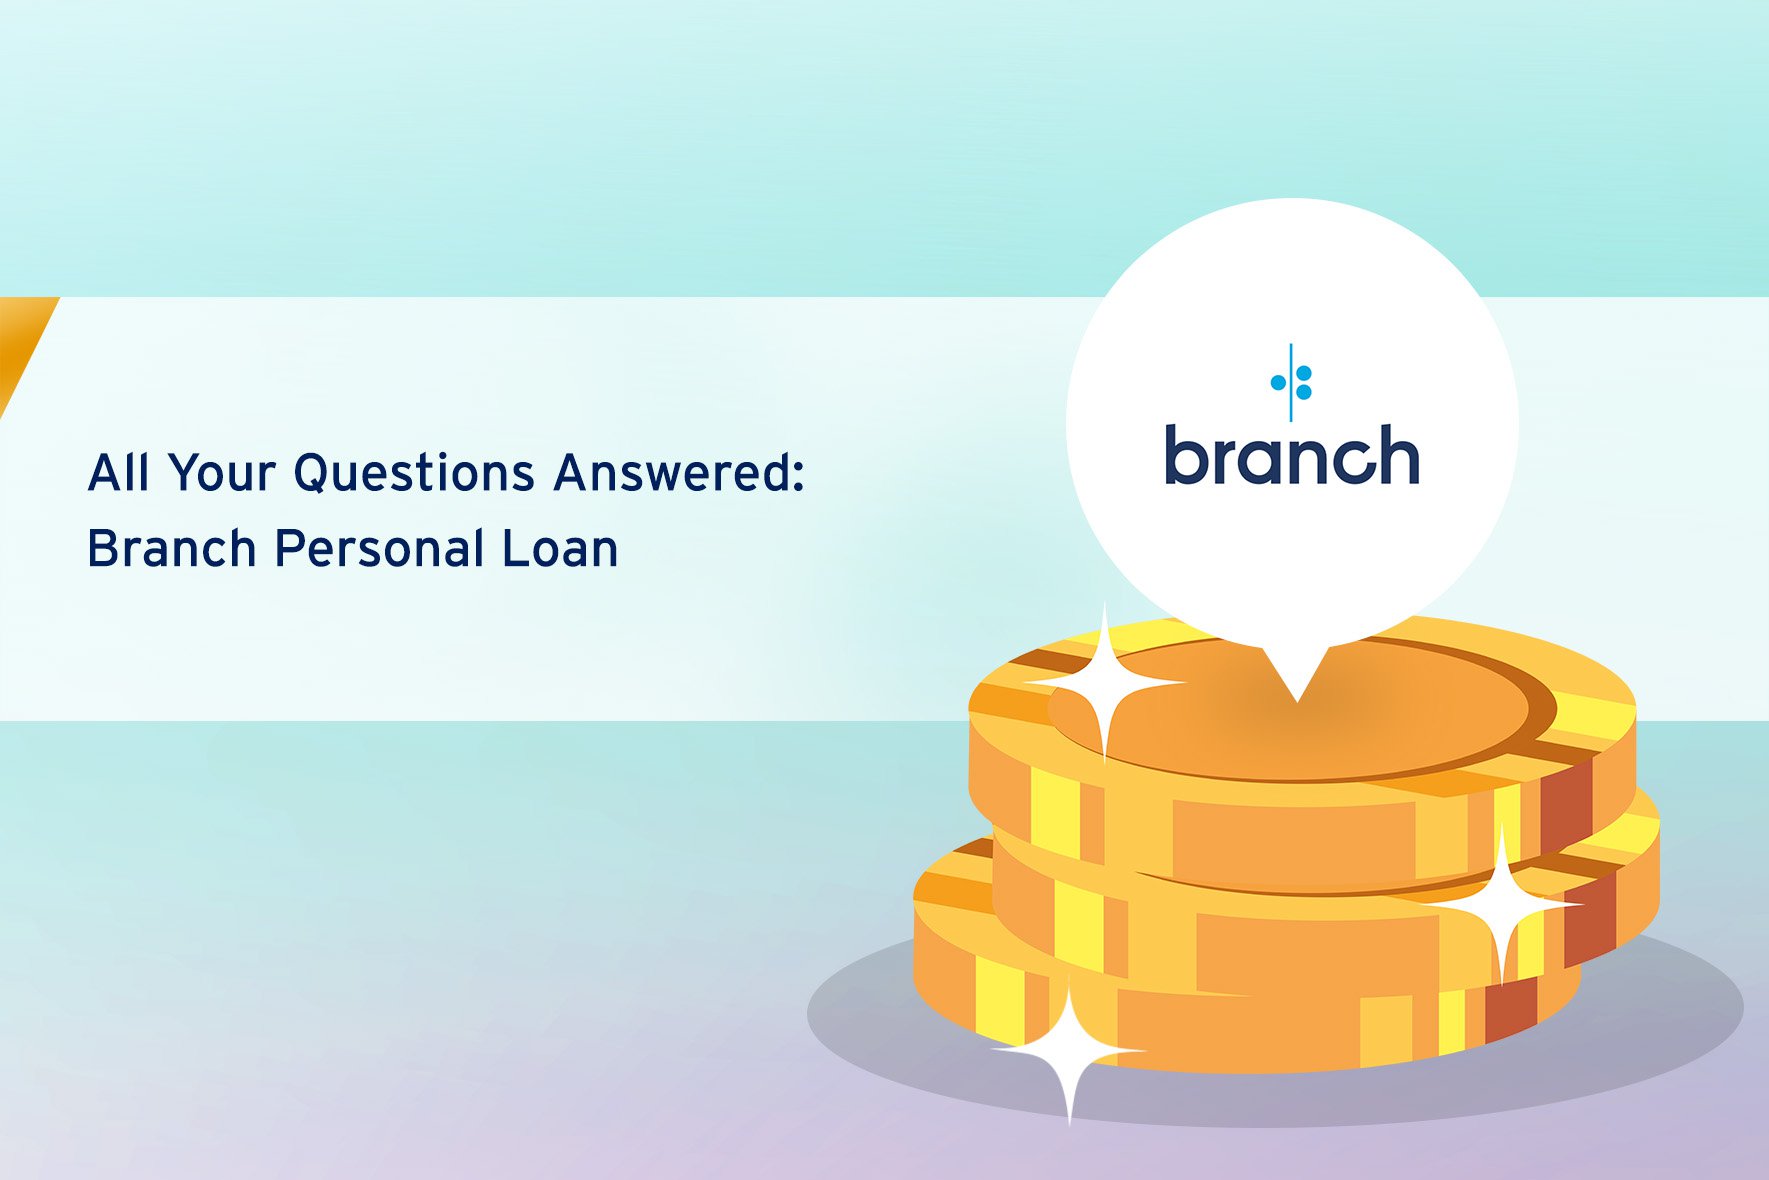 All Your Questions Answered: Branch Personal Loan cover